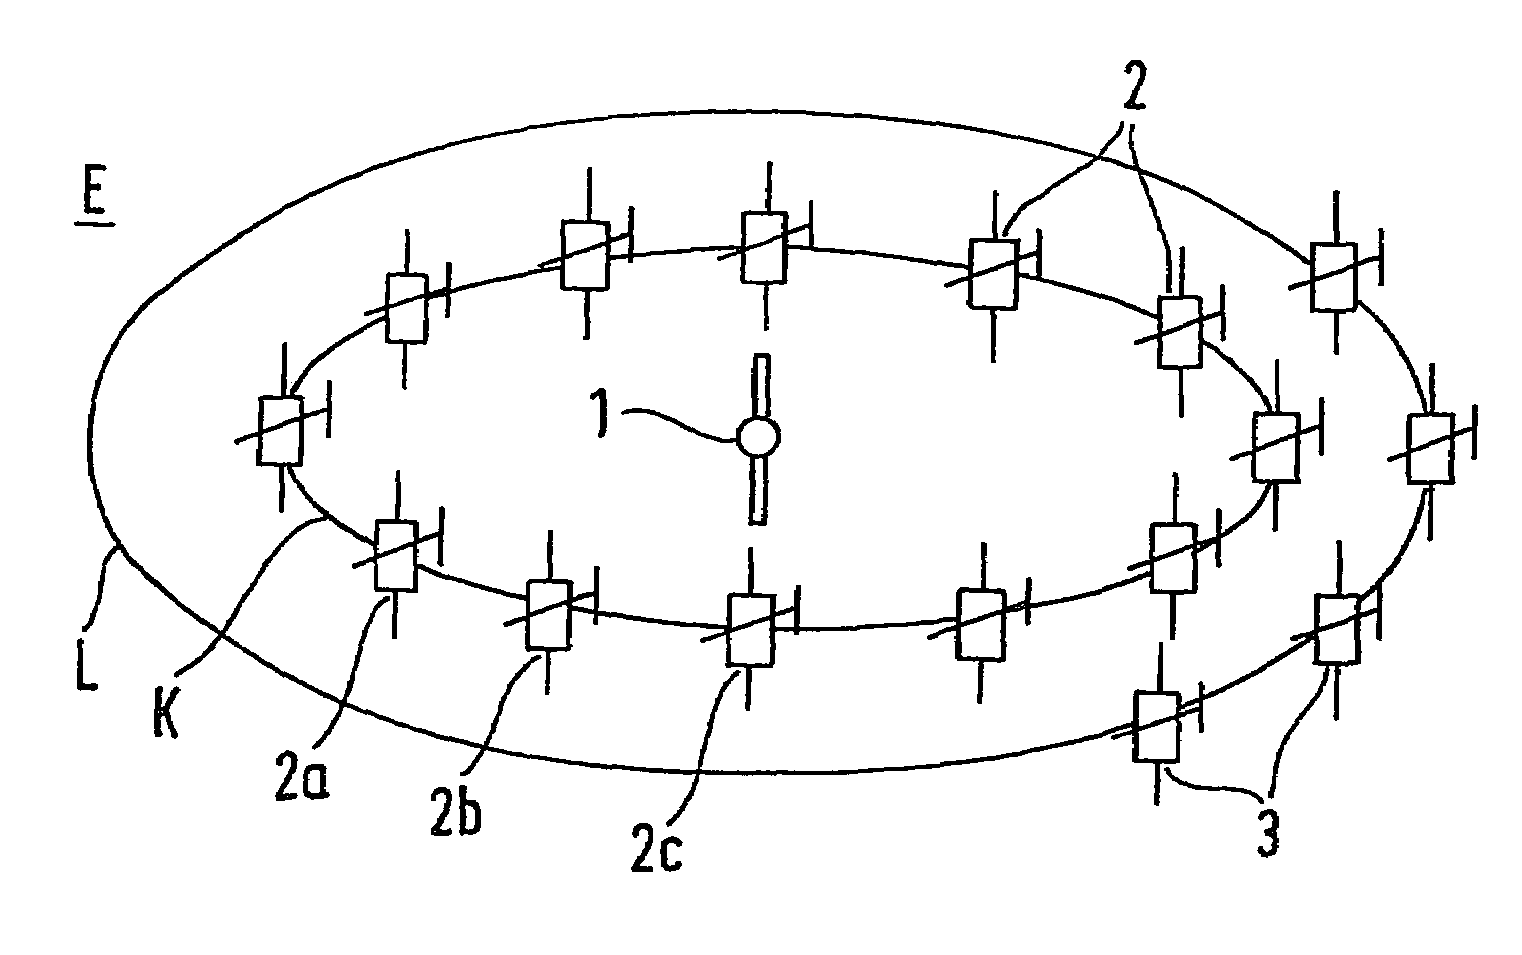 Phase controlled antennae for data transmission between mobile devices